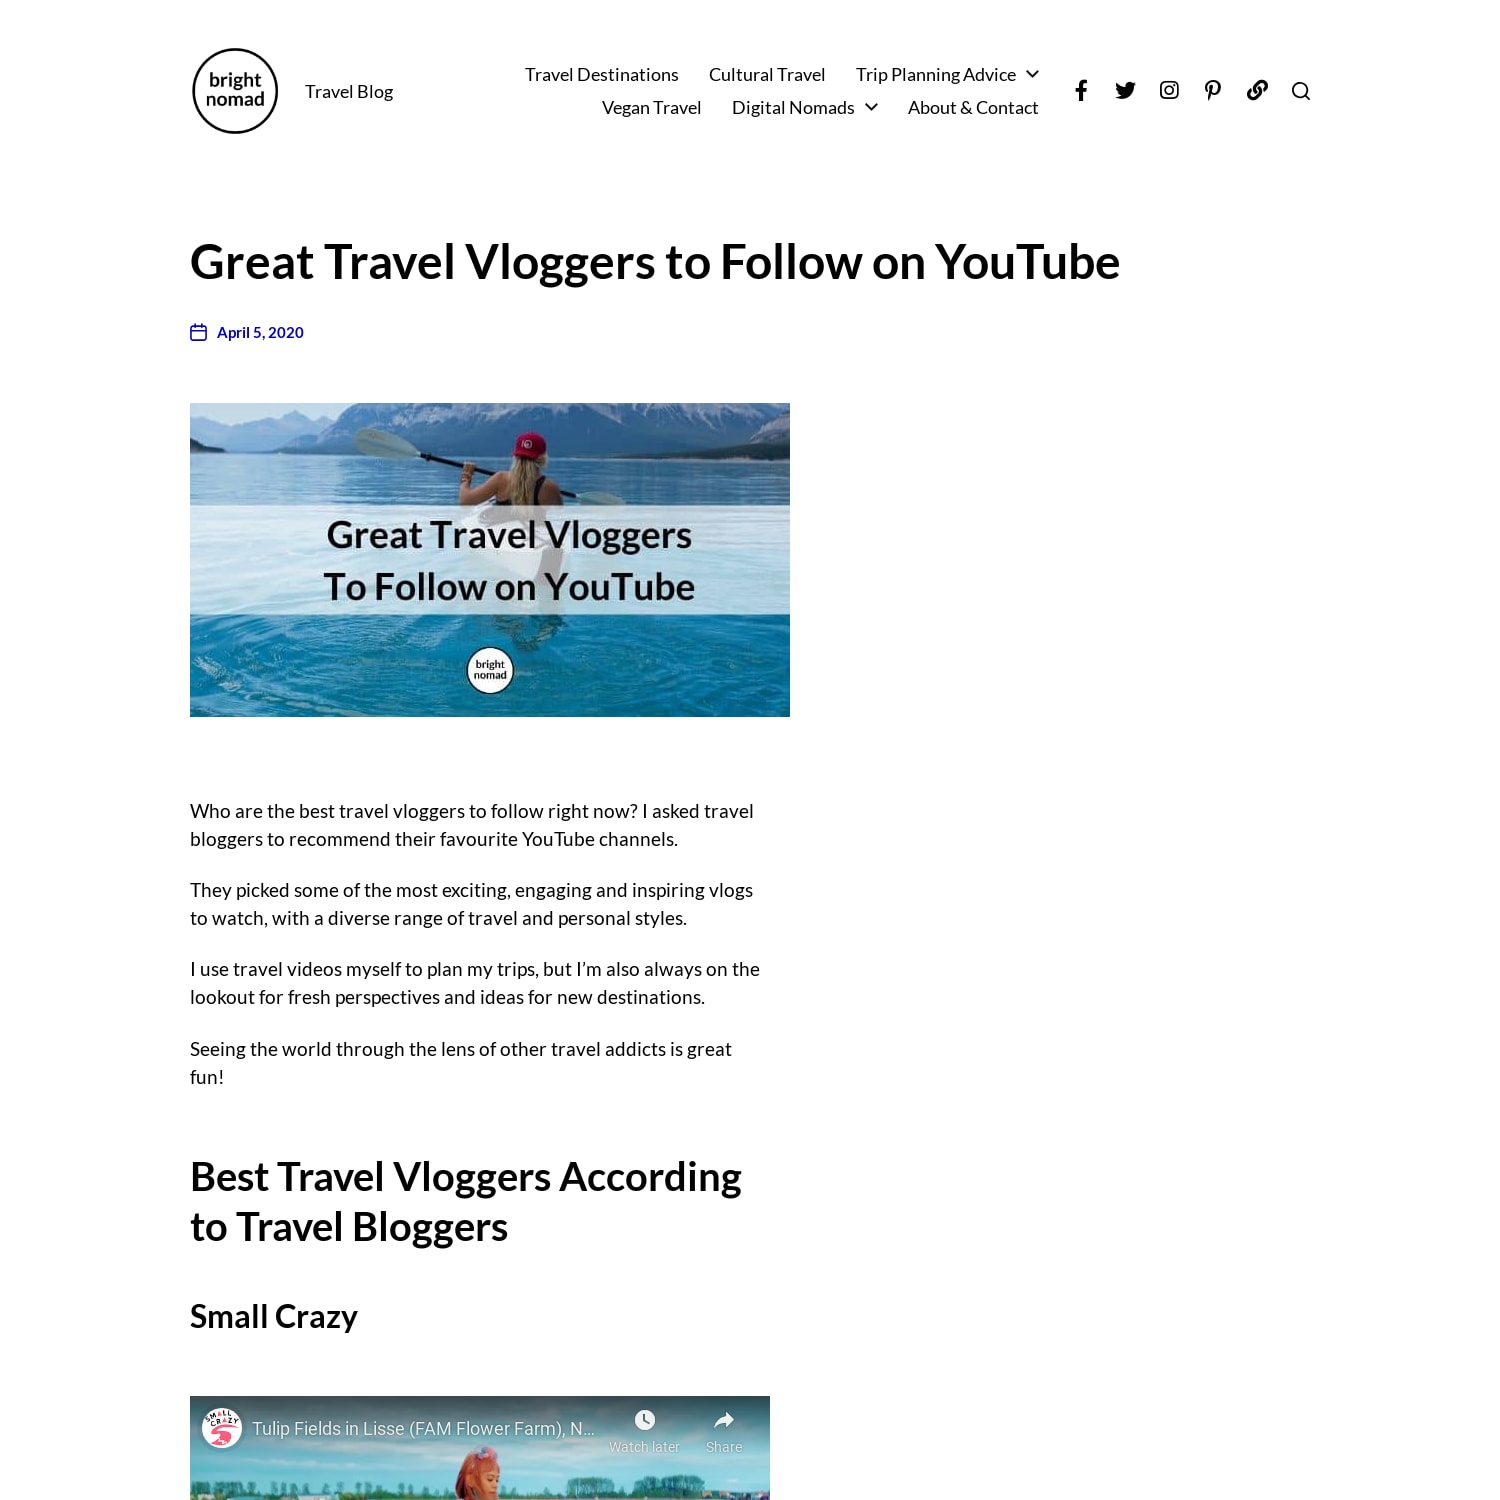 Great Travel Vloggers to Follow on YouTube (Selected by Travel Bloggers)